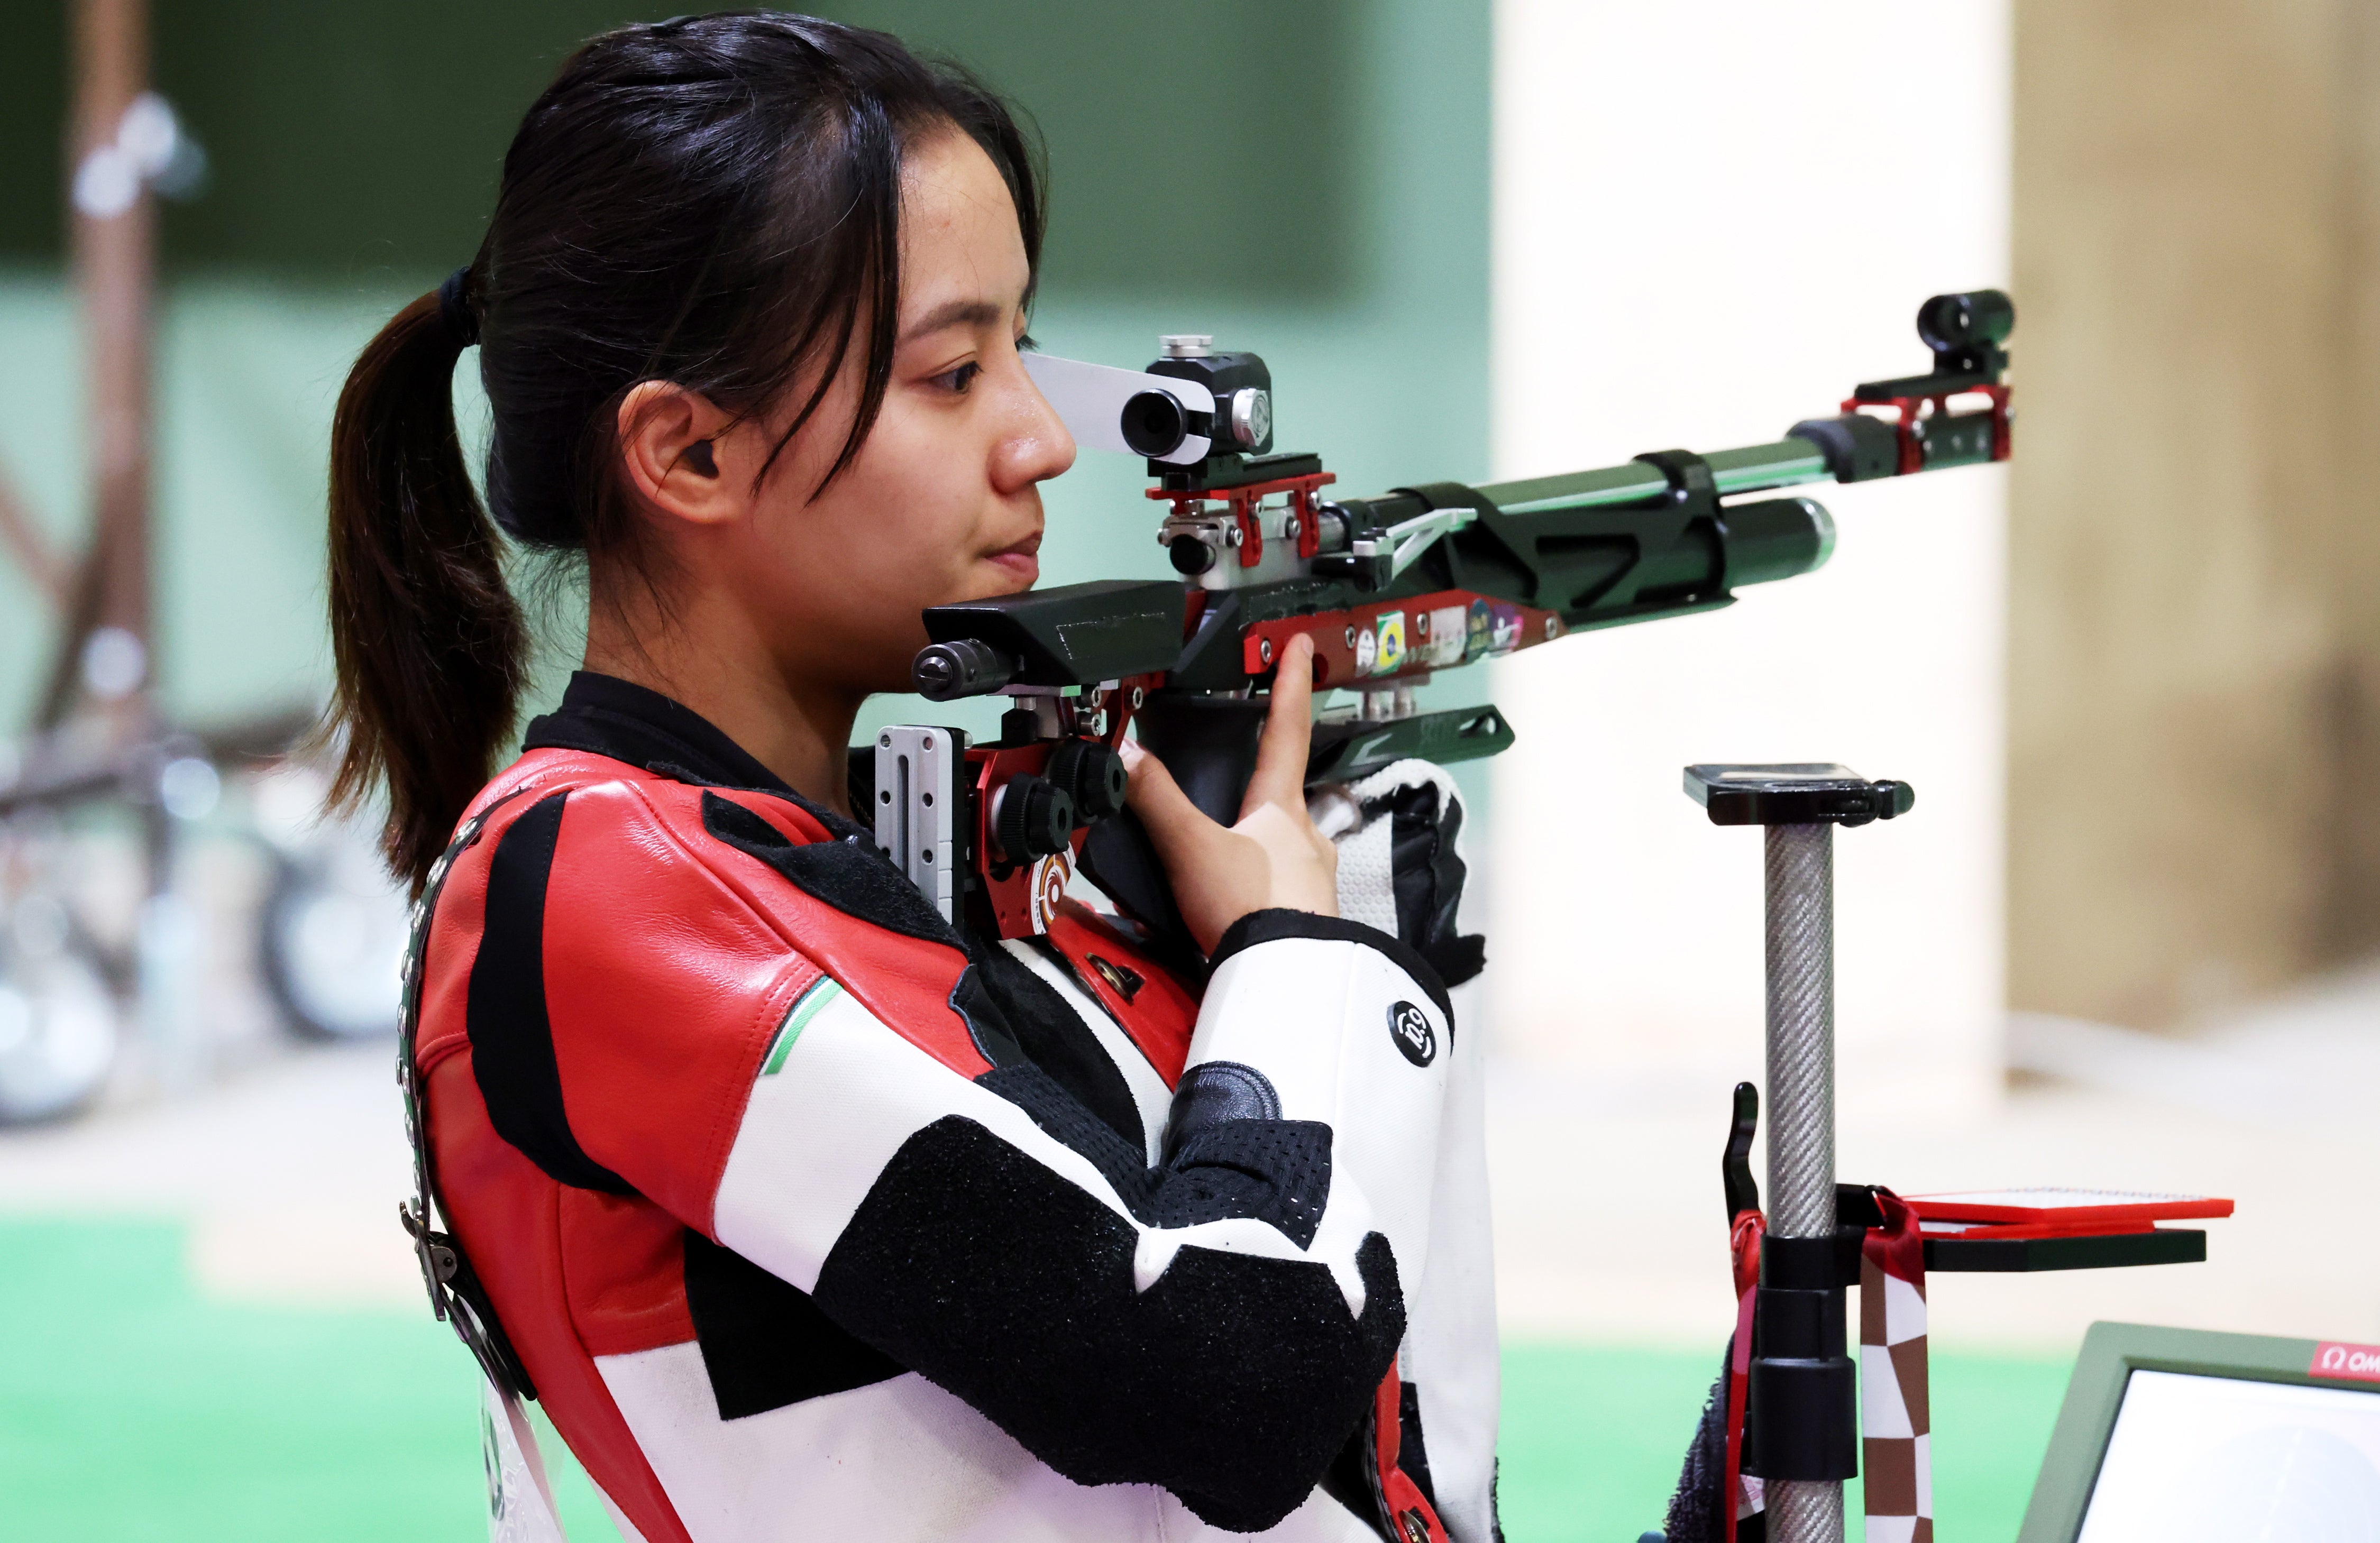 Luyao Wang of China during the 10m Air Rifle Women's Qualification of the Shooting events of the Tokyo 2020 Olympic Games